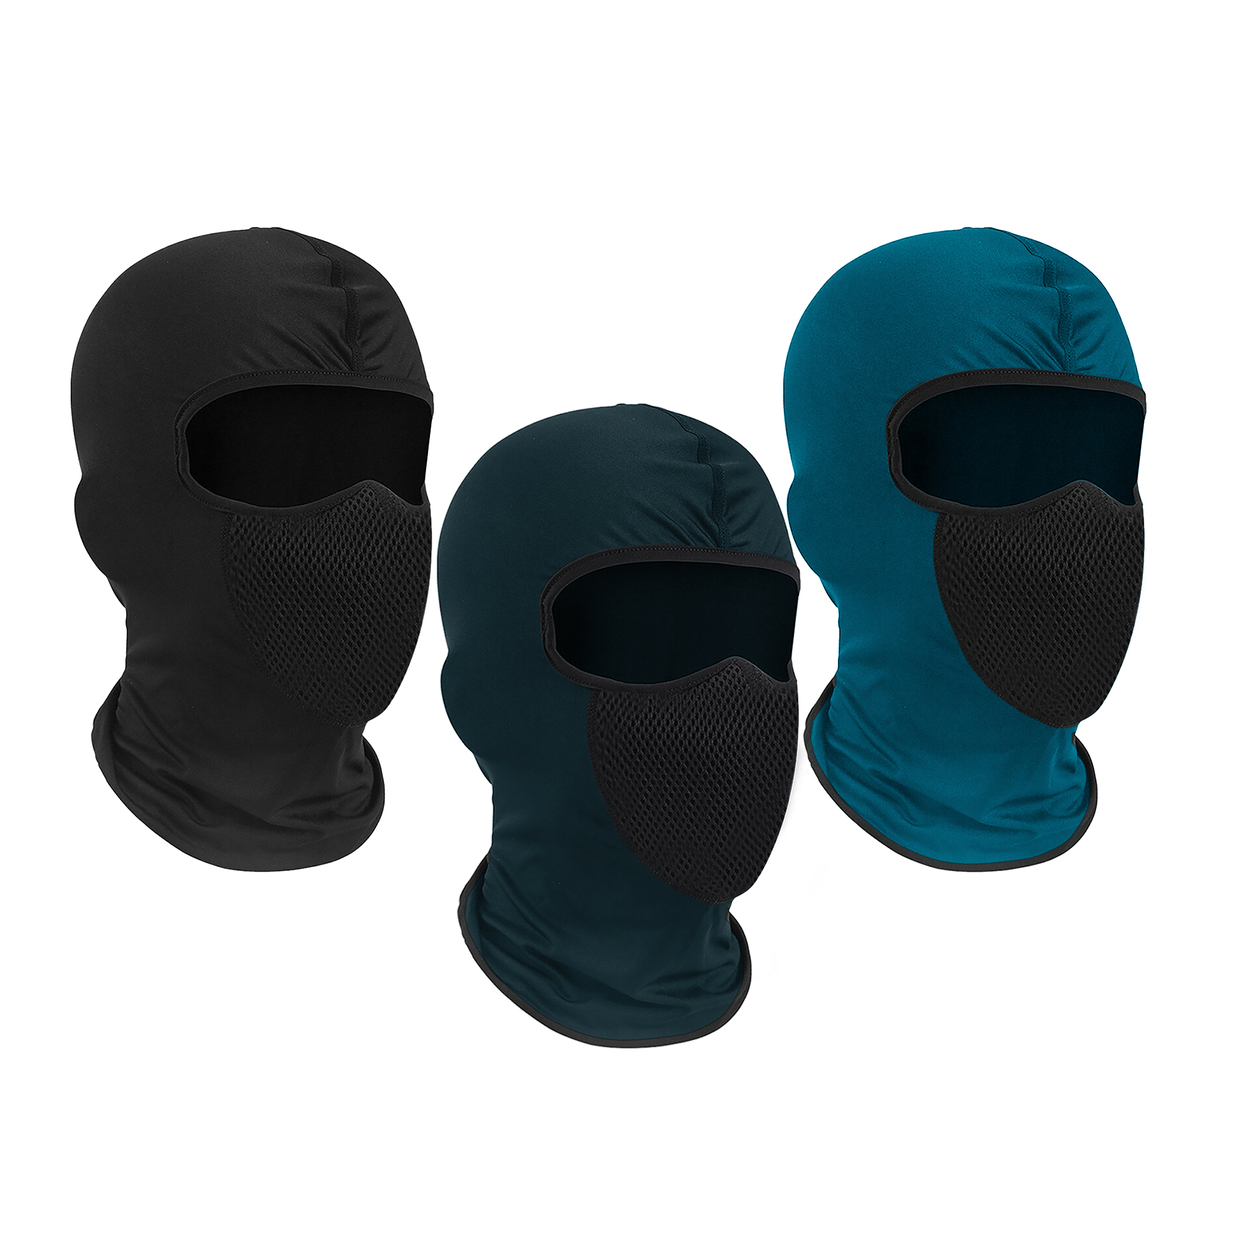 Men's Warm Winter Windproof Breathable Cozy Thermal Balaclava Winter Ski Full Face Mask - Blue